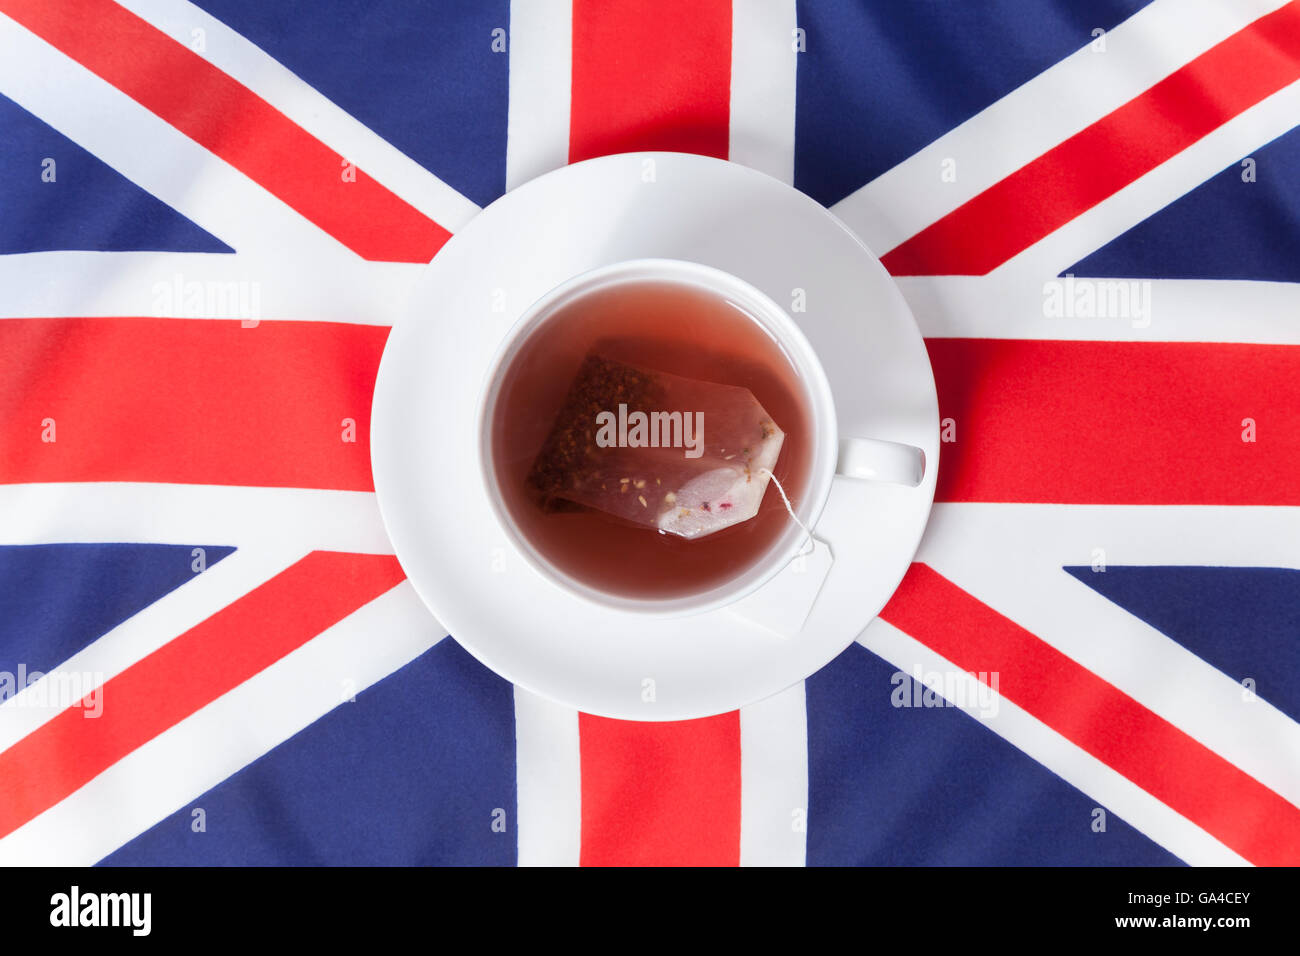 GB flag and a cup of tea (Brexit) Stock Photo